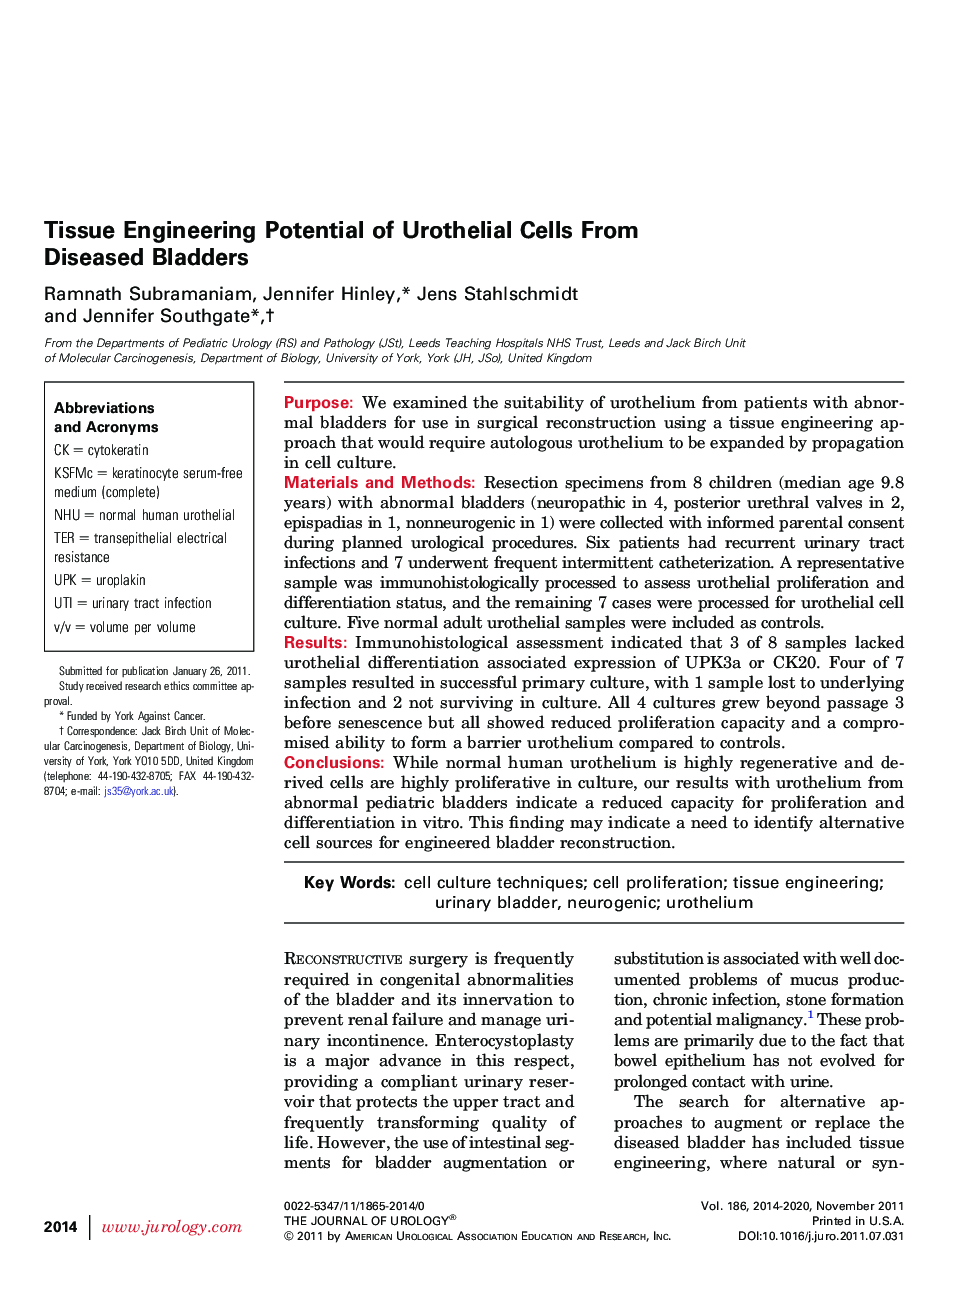 Tissue Engineering Potential of Urothelial Cells From Diseased Bladders 